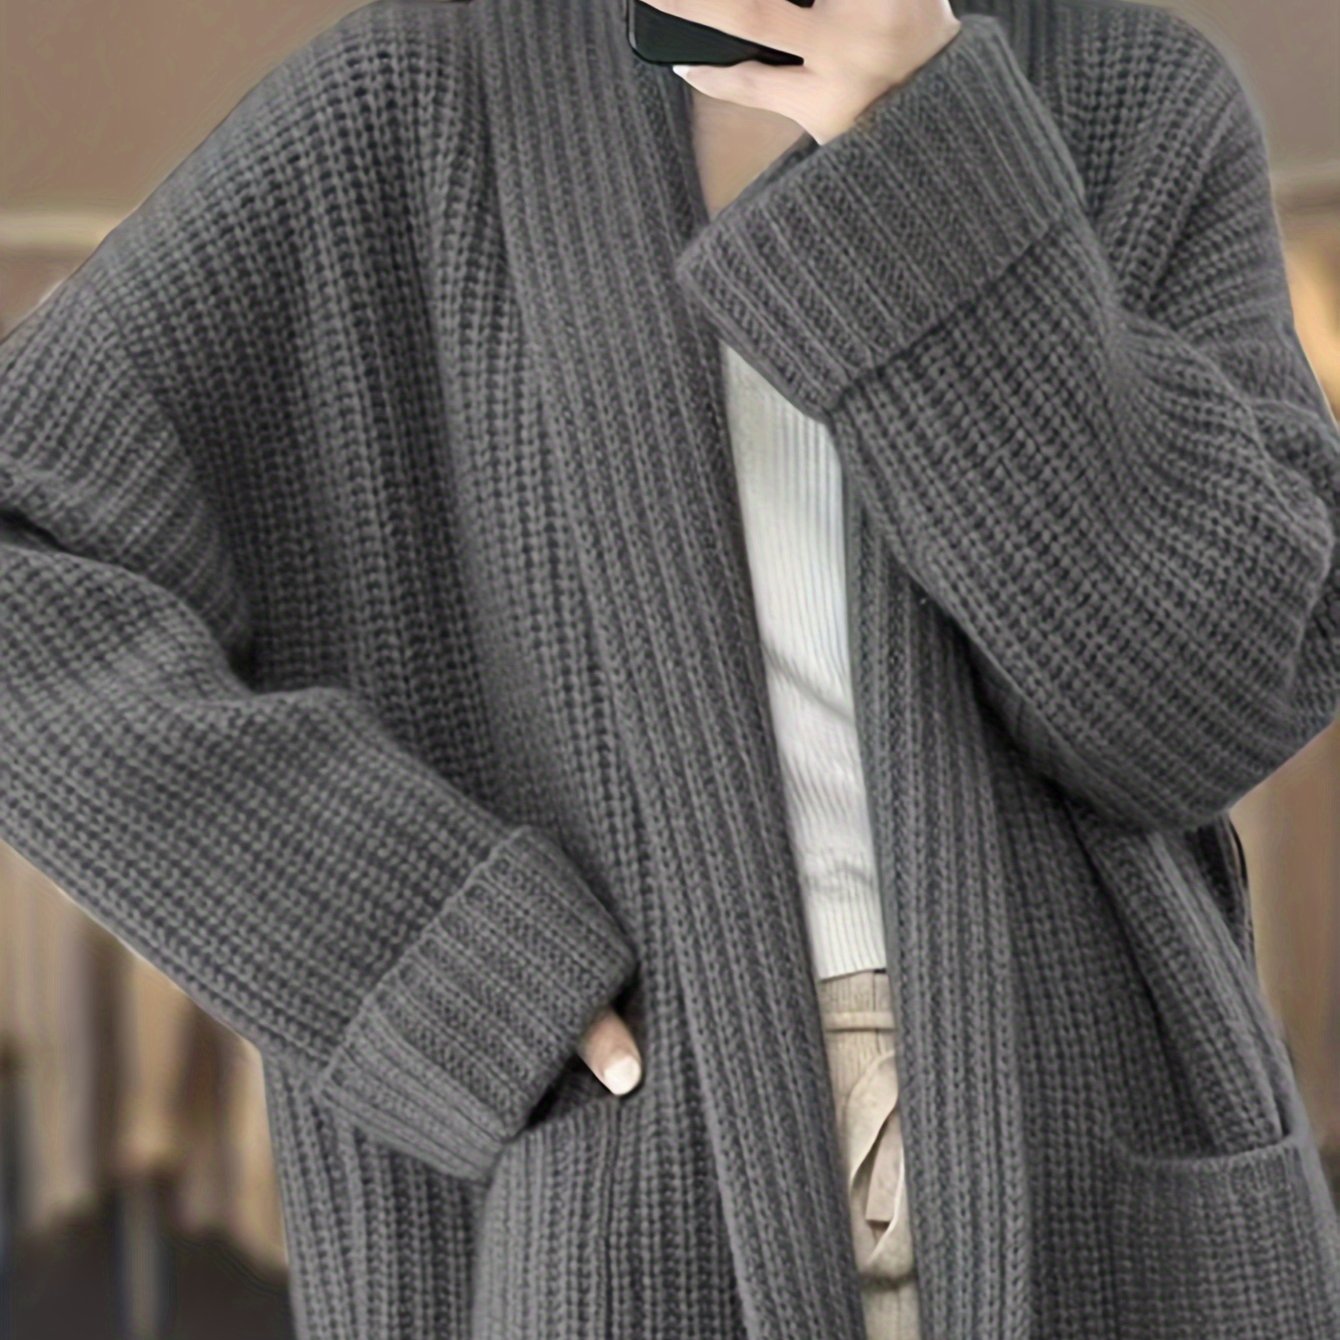 Vzyzv Solid Open Front Knit Cardigan, Casual Long Sleeve Oversized Sweater Coat With Pocket, Women's Clothing